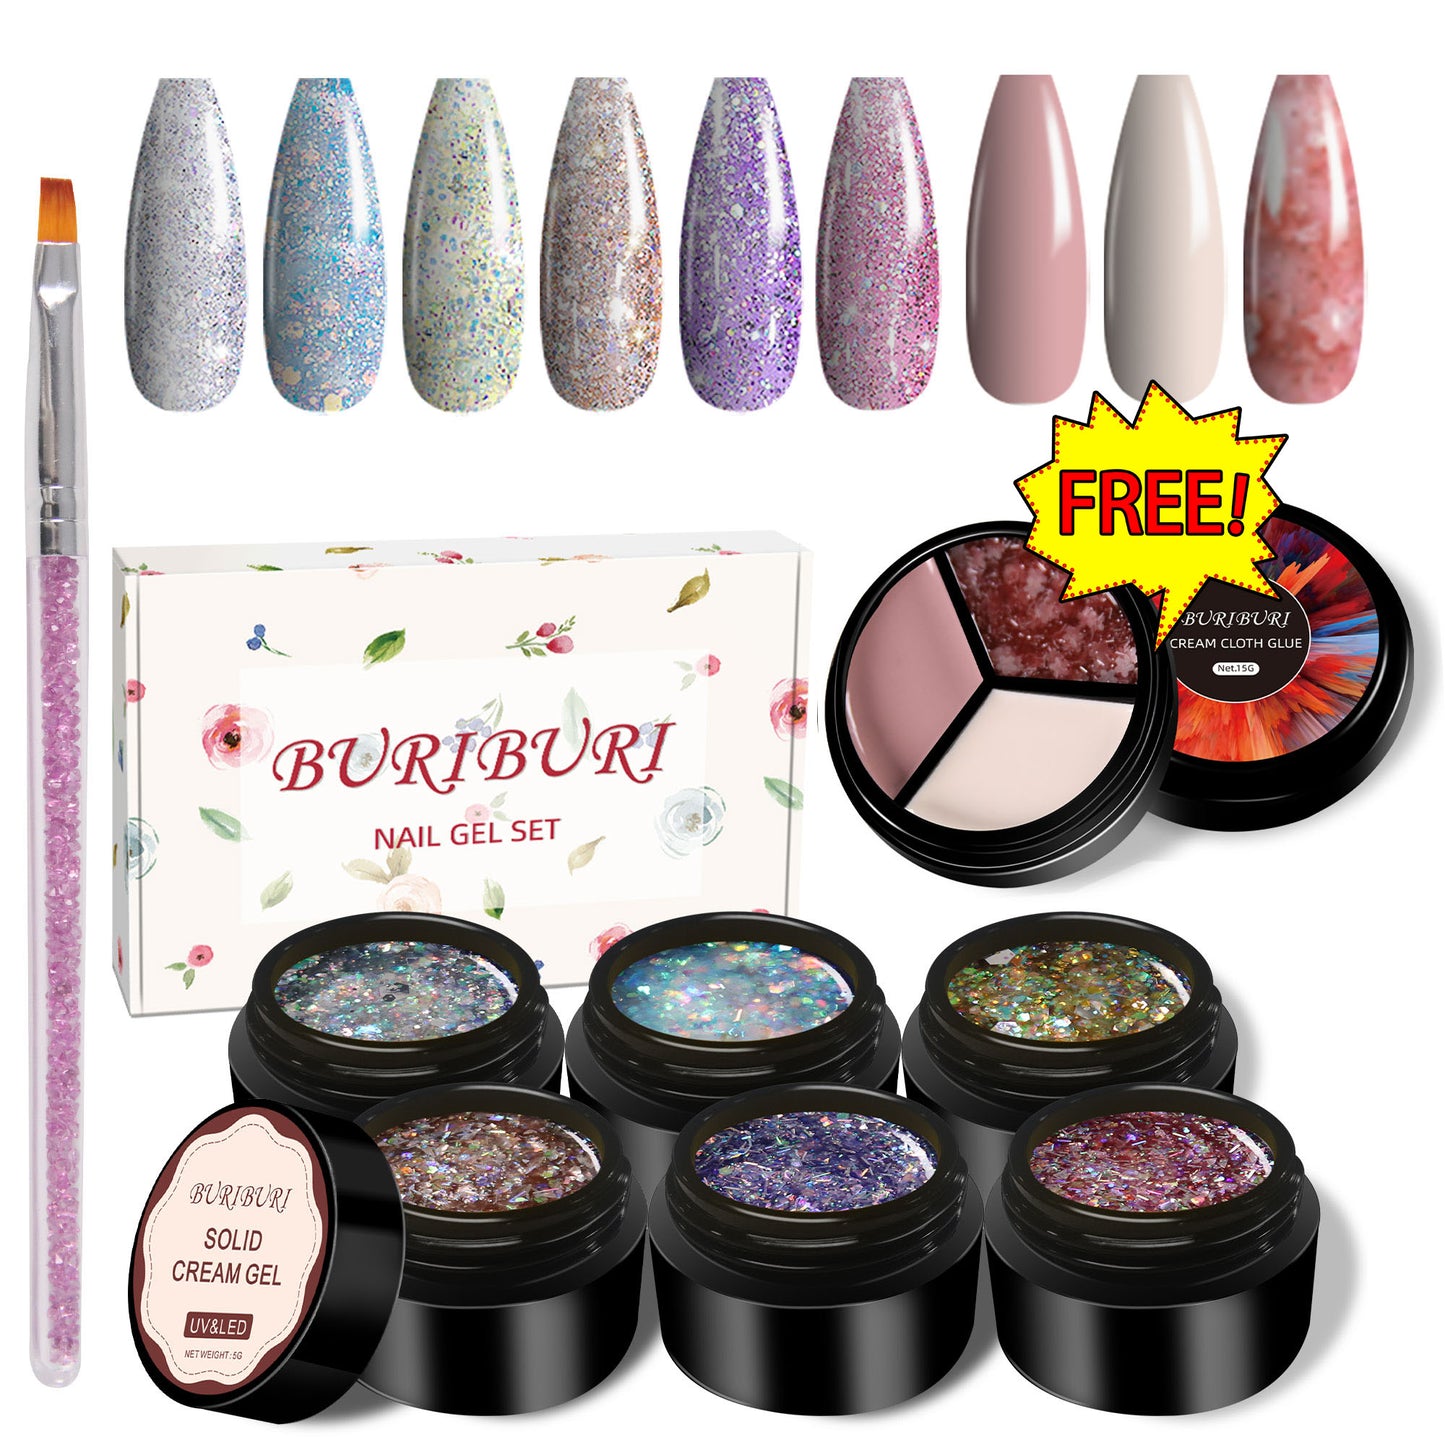 Shiny Glitter 6 Colors Set + Free 3-colors-in-1 (#24) Solid Cream Gel Polish